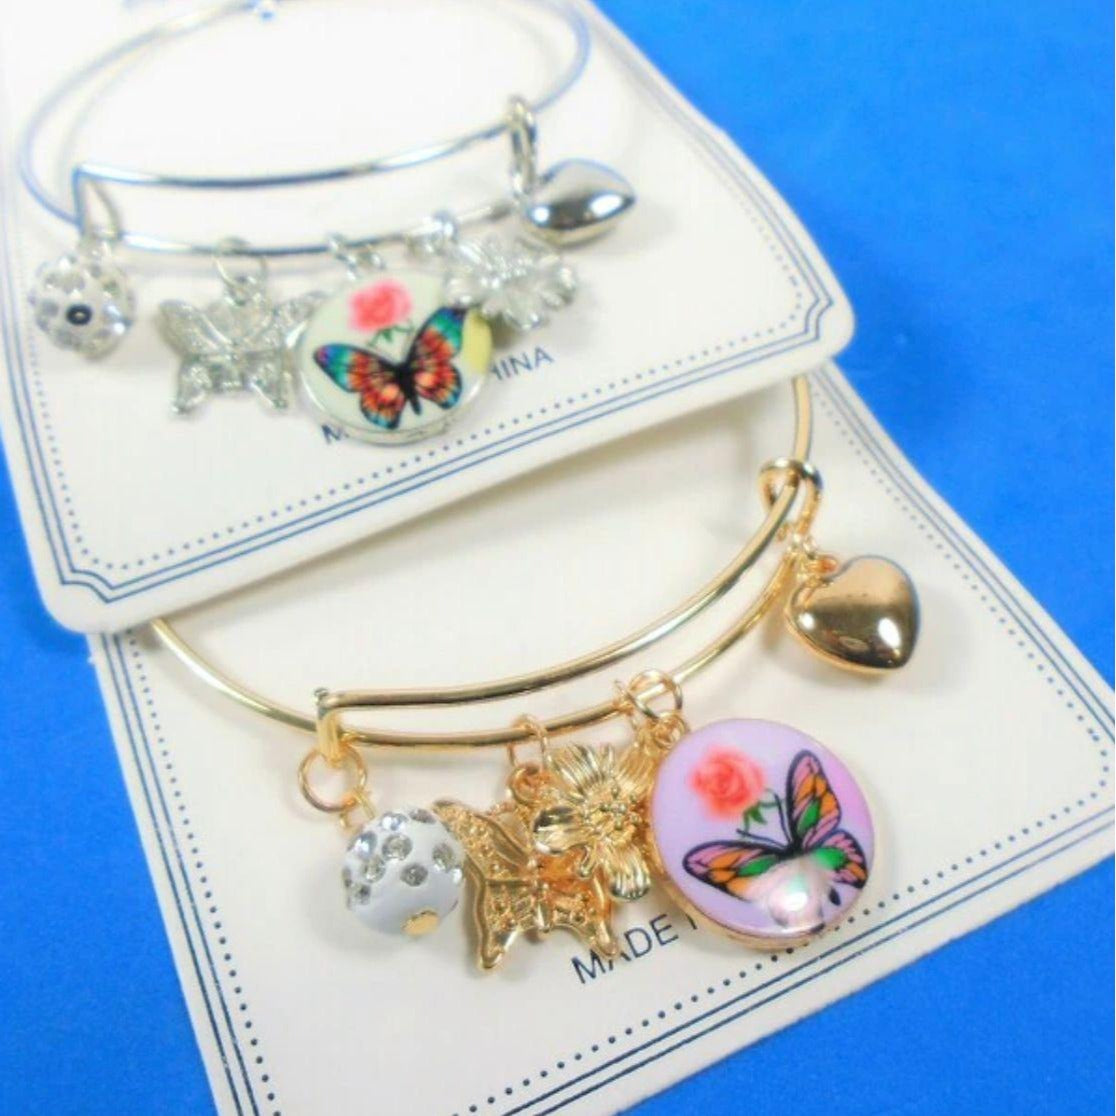 Gold & Silver Wire Bangle Bracelet w/ Mixed Butterfly Heart Charm & Fireball Bead